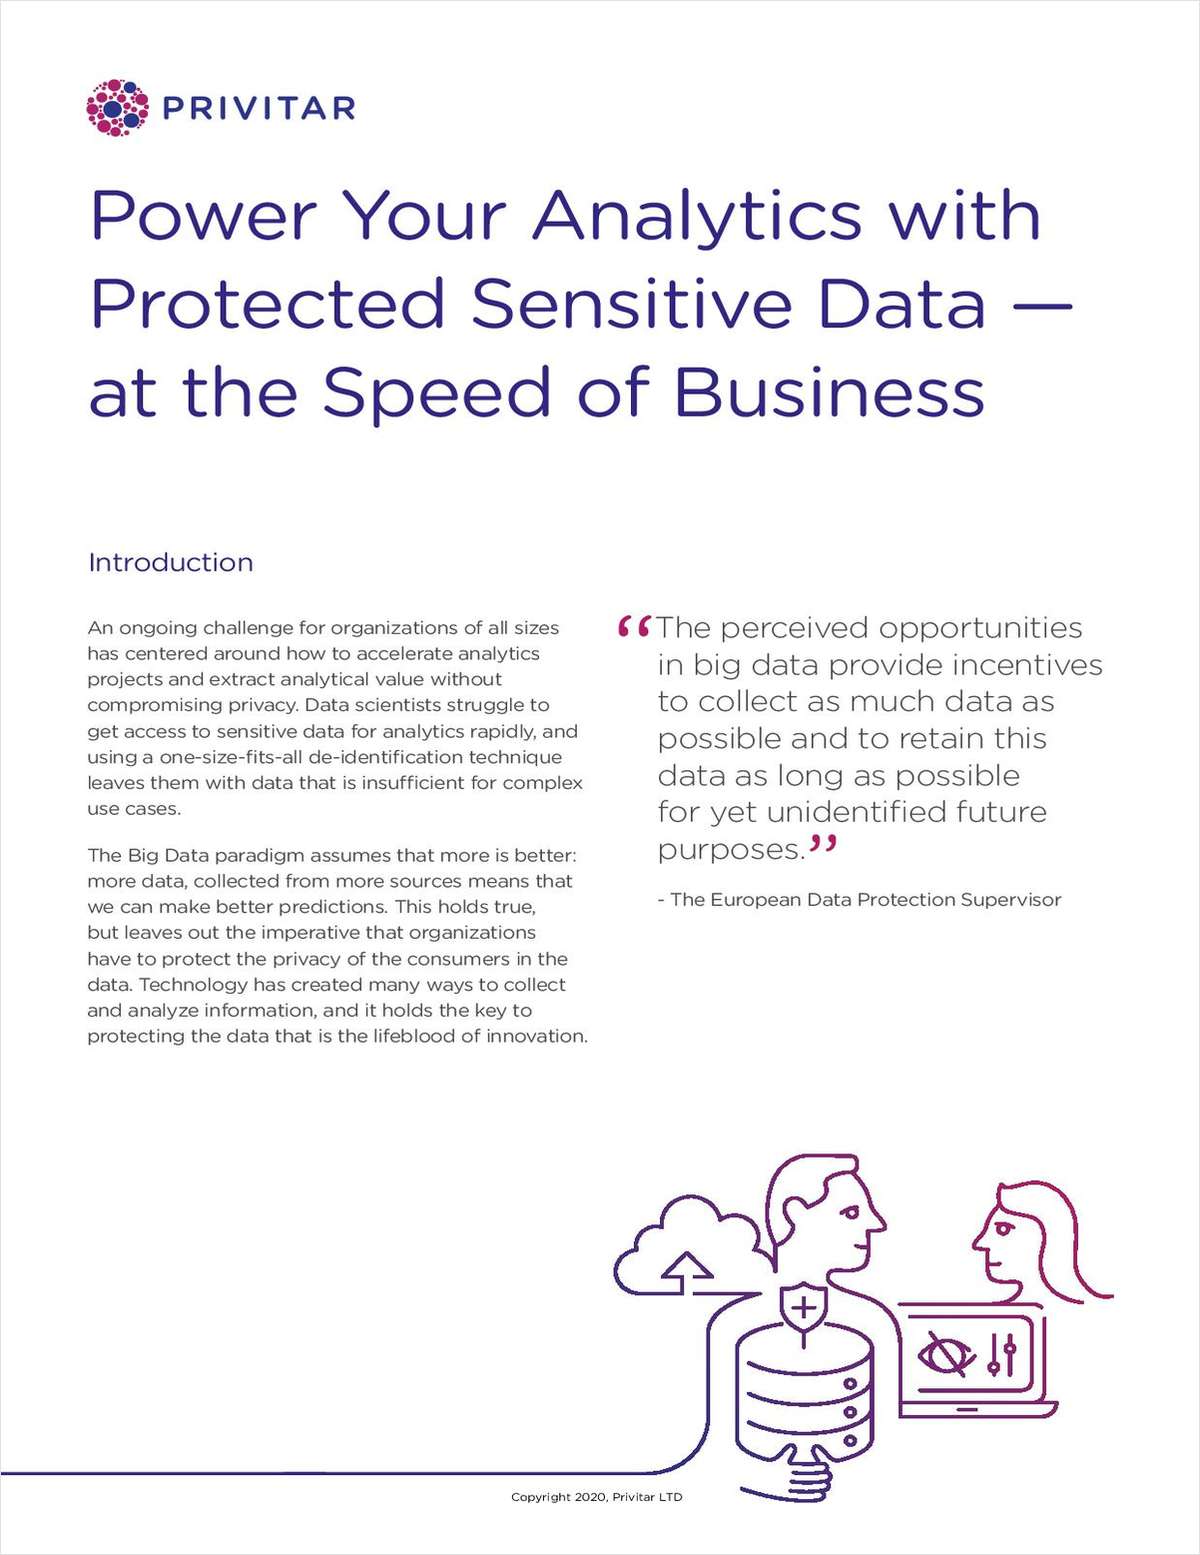 Power Your Analytics with Protected Sensitive Data - going at the Speed of Business